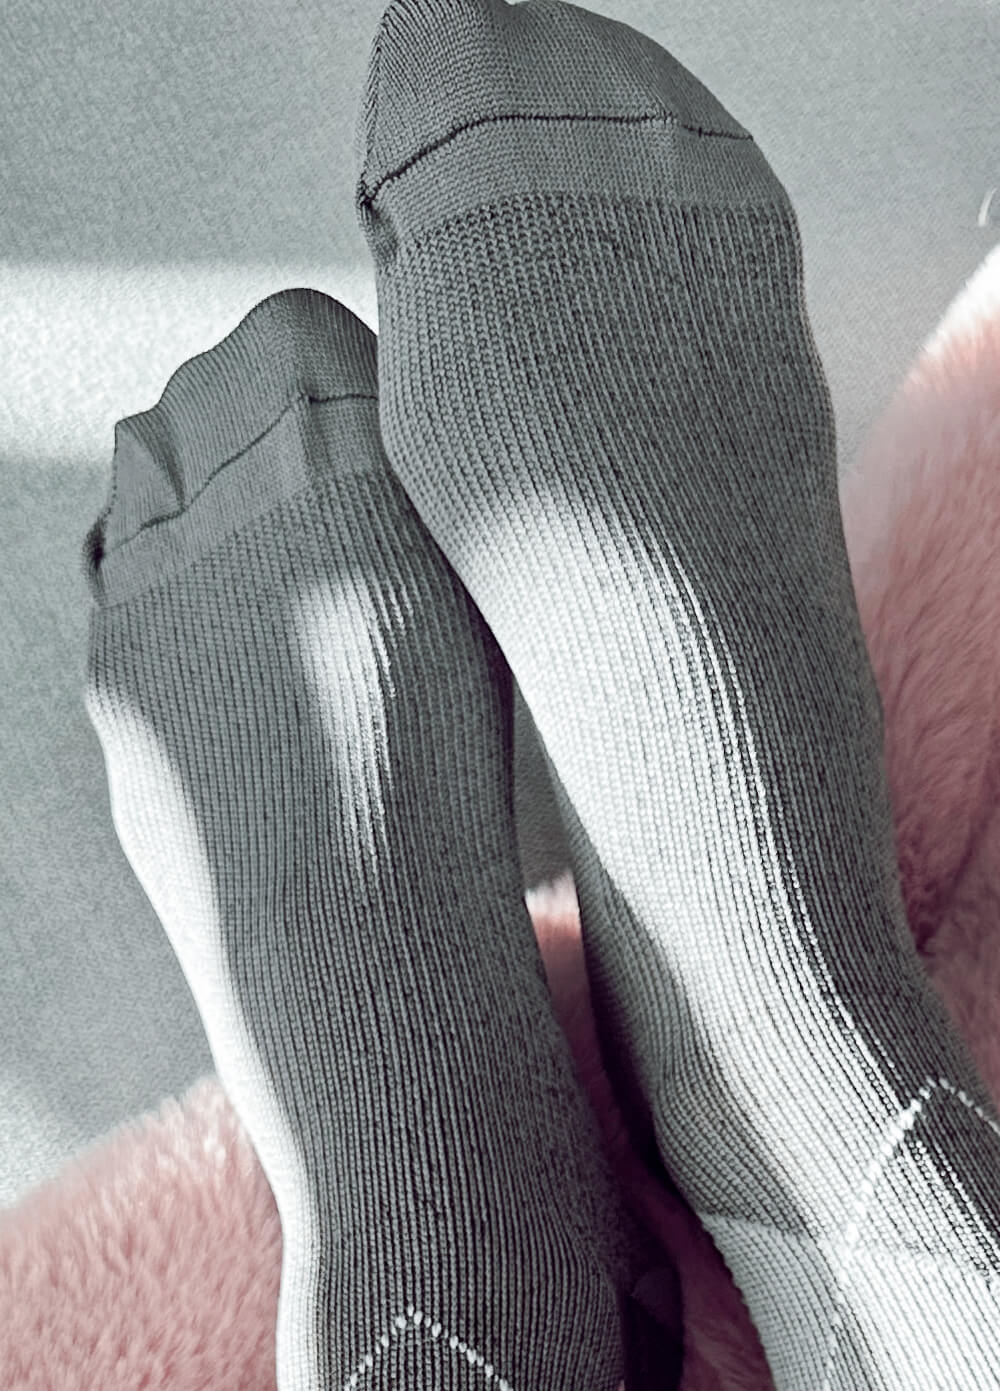 Mama Sox - Excite Maternity Compression Socks in Grey Argyle